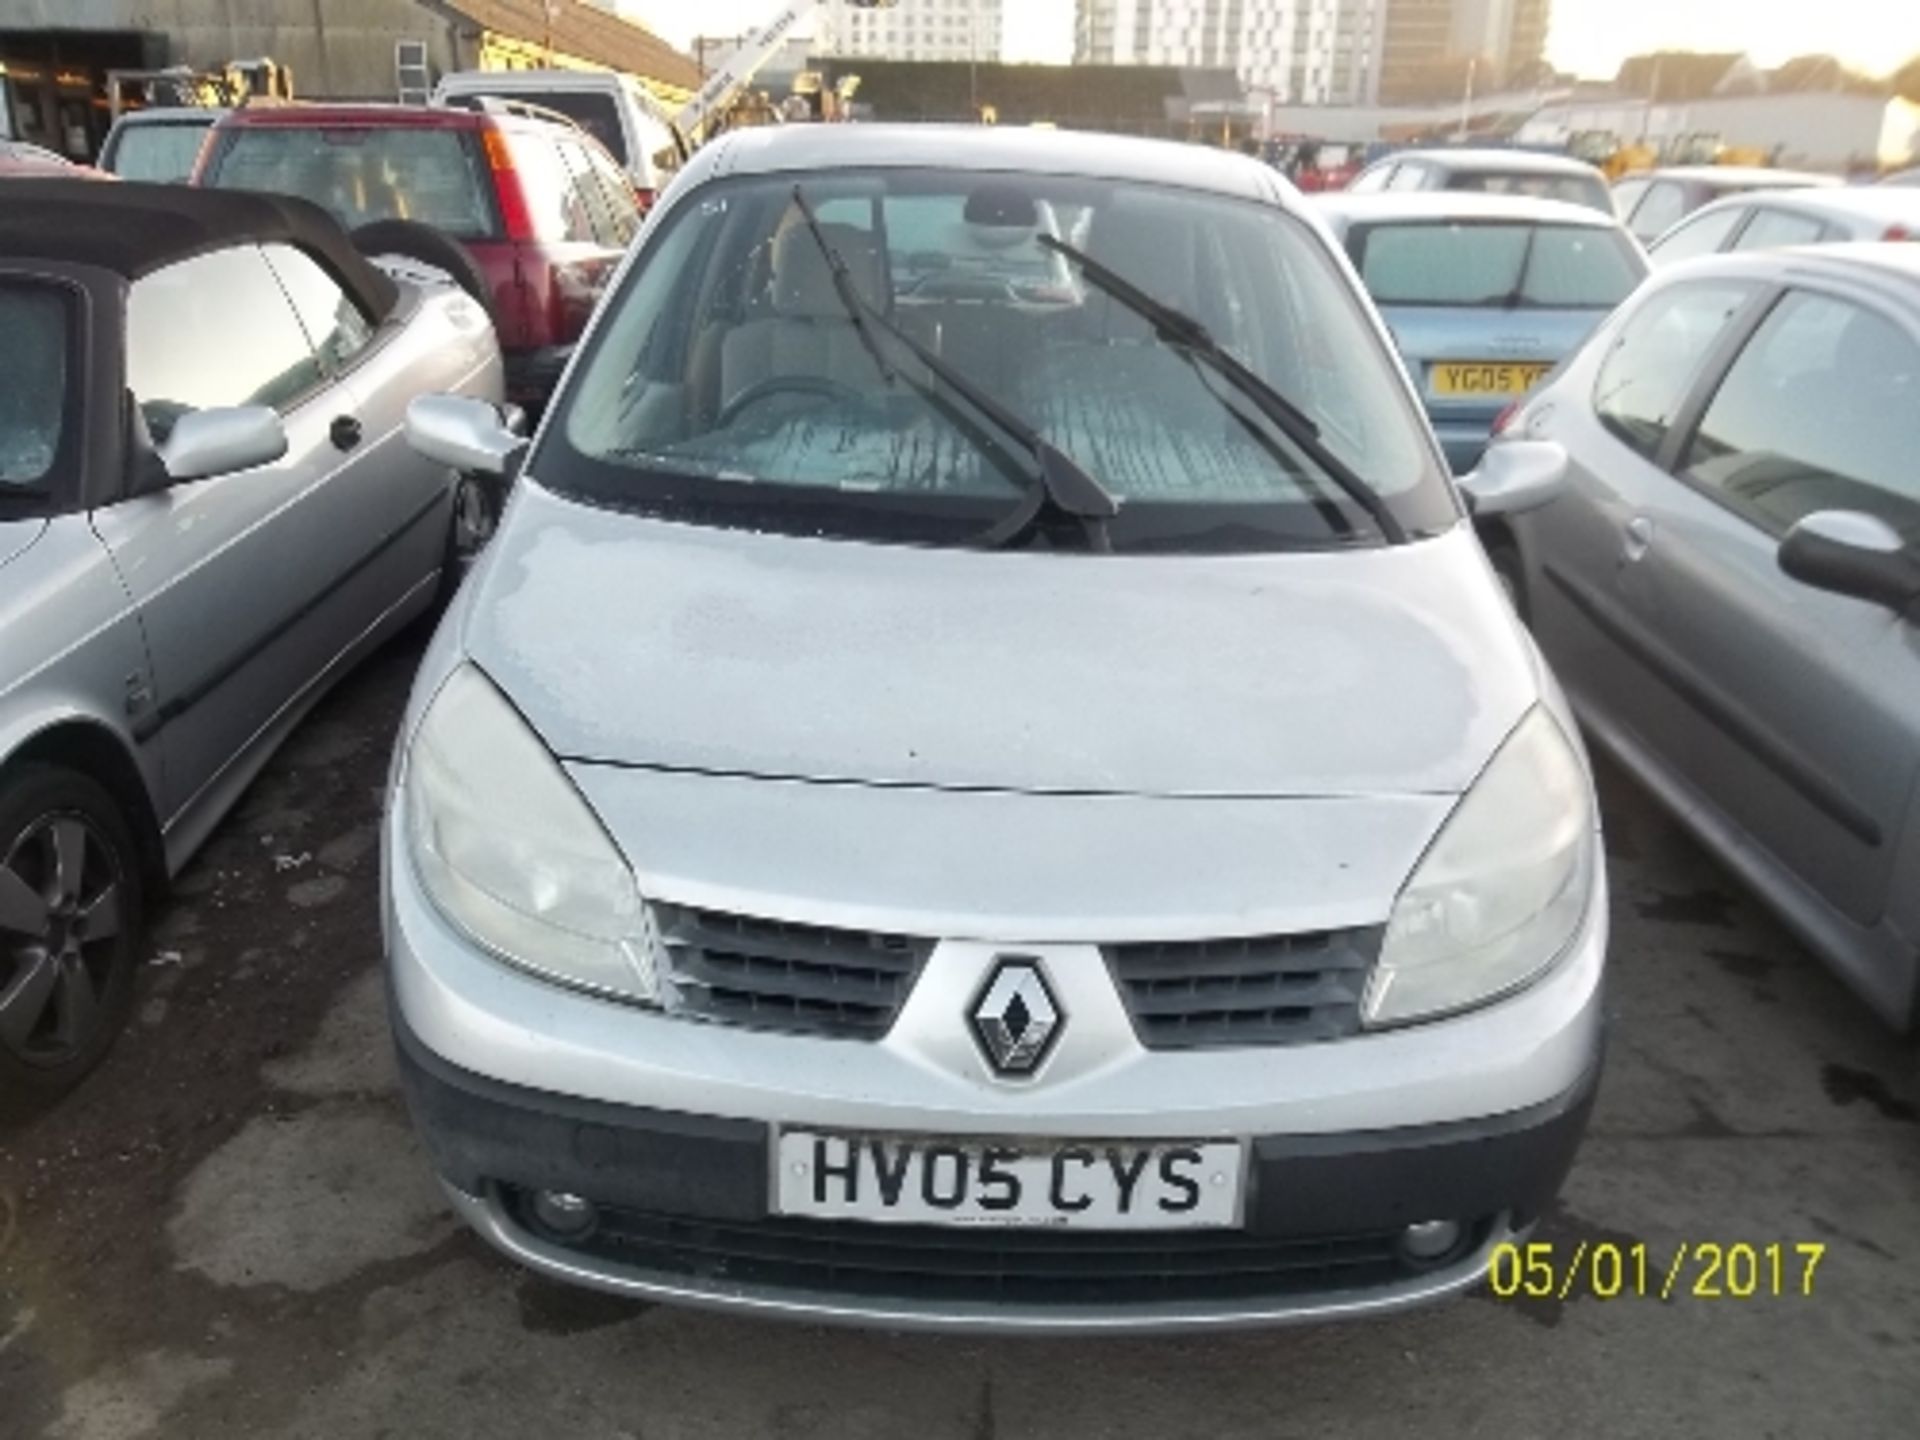 Renault Scenic Expression 16V - HV05 CYS Date of registration: 29.03.2005 1598cc, petrol, manual,